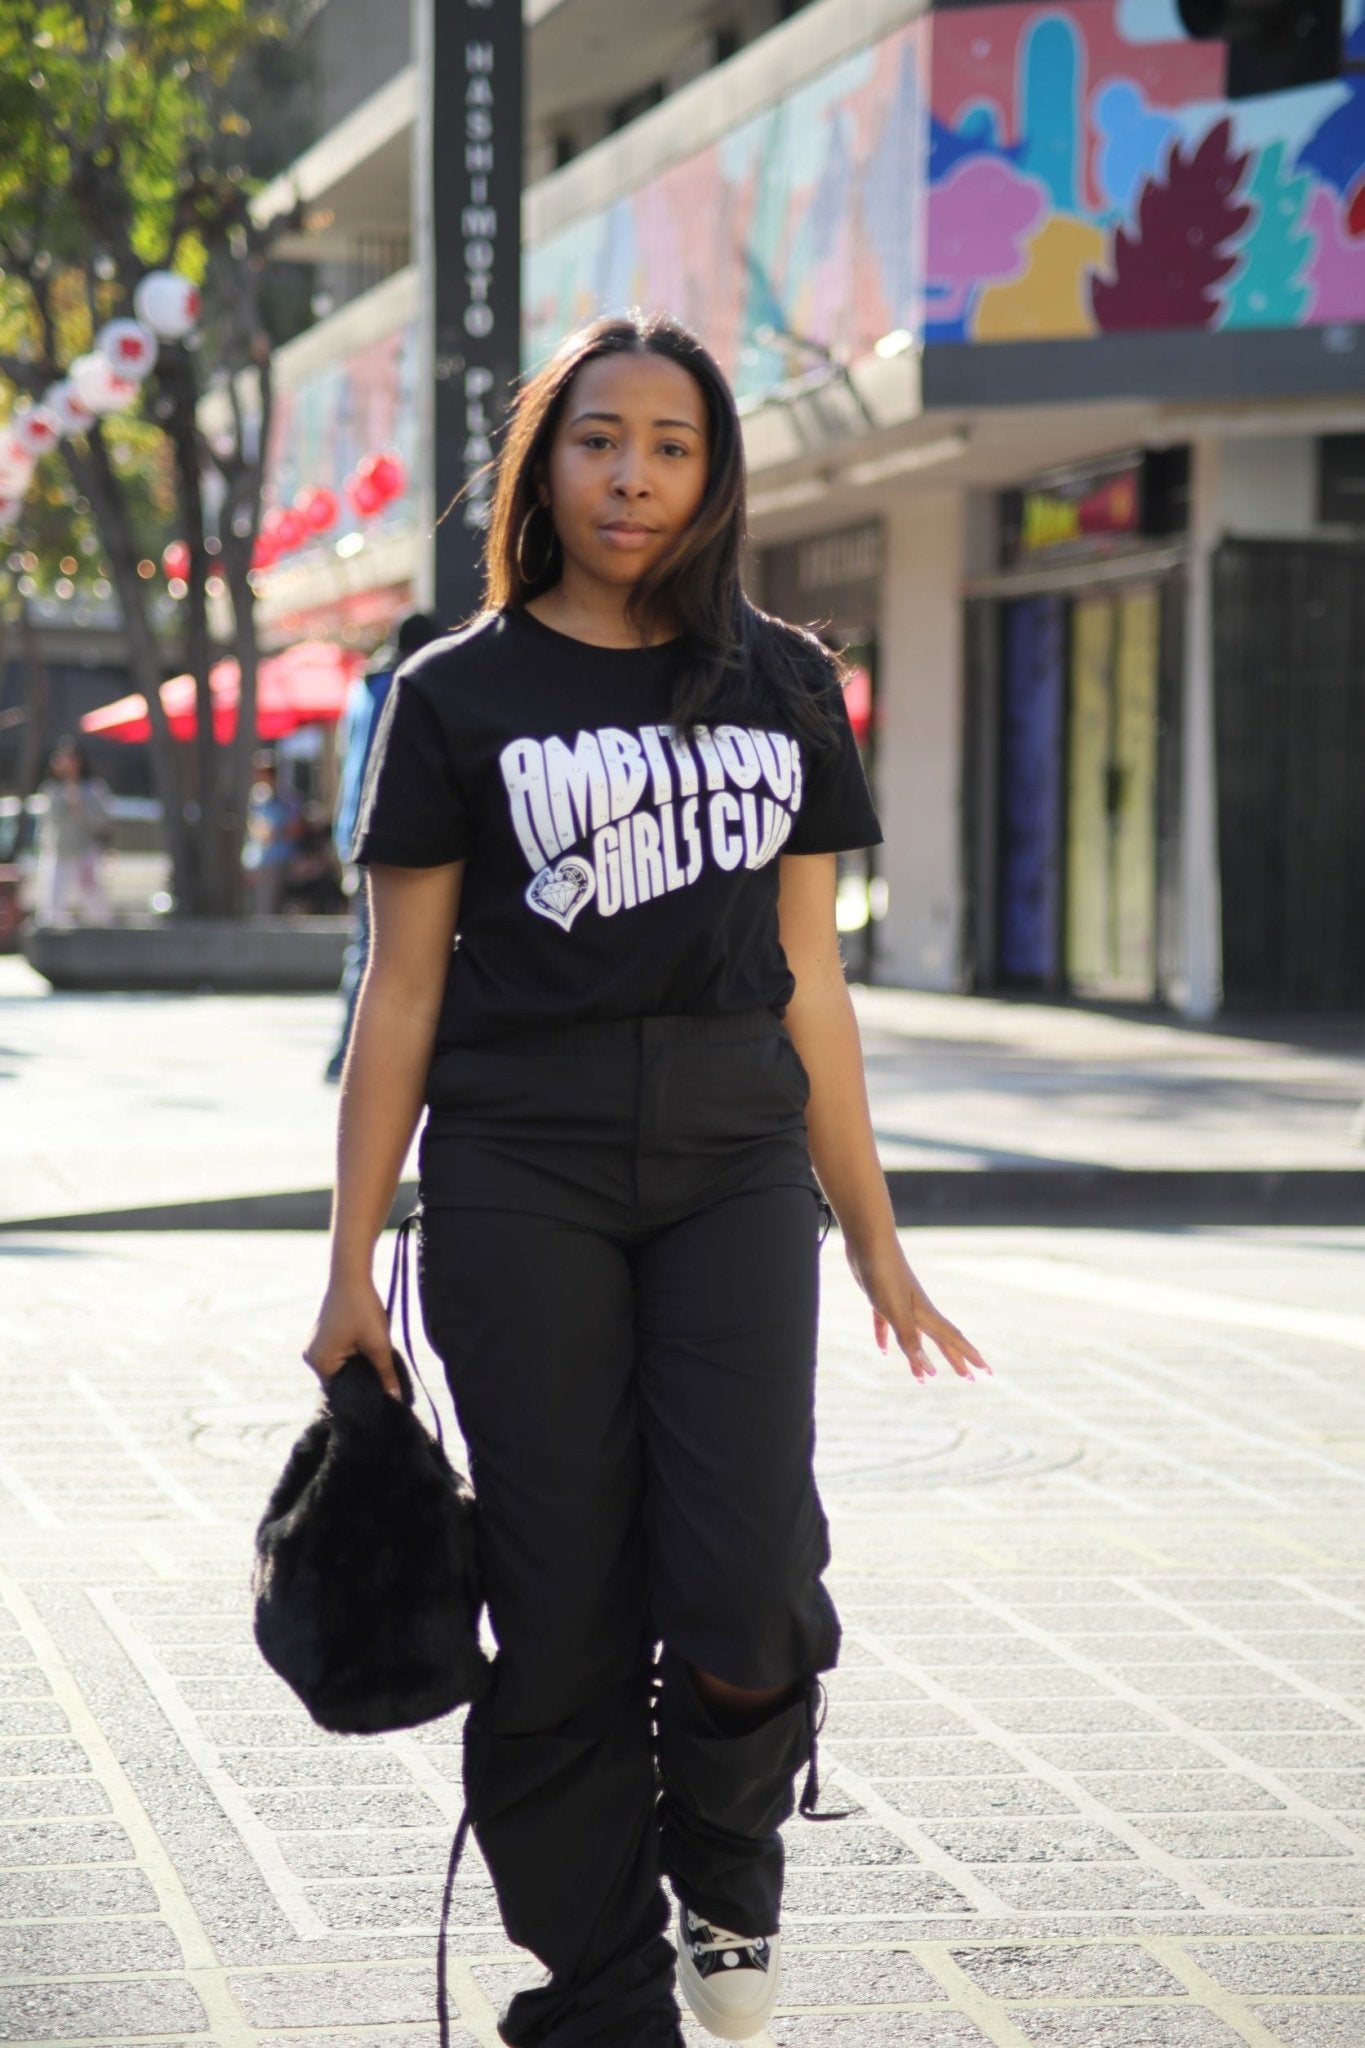 Ambitious Girls Club Black: Tee - Ambition Is The New Pink